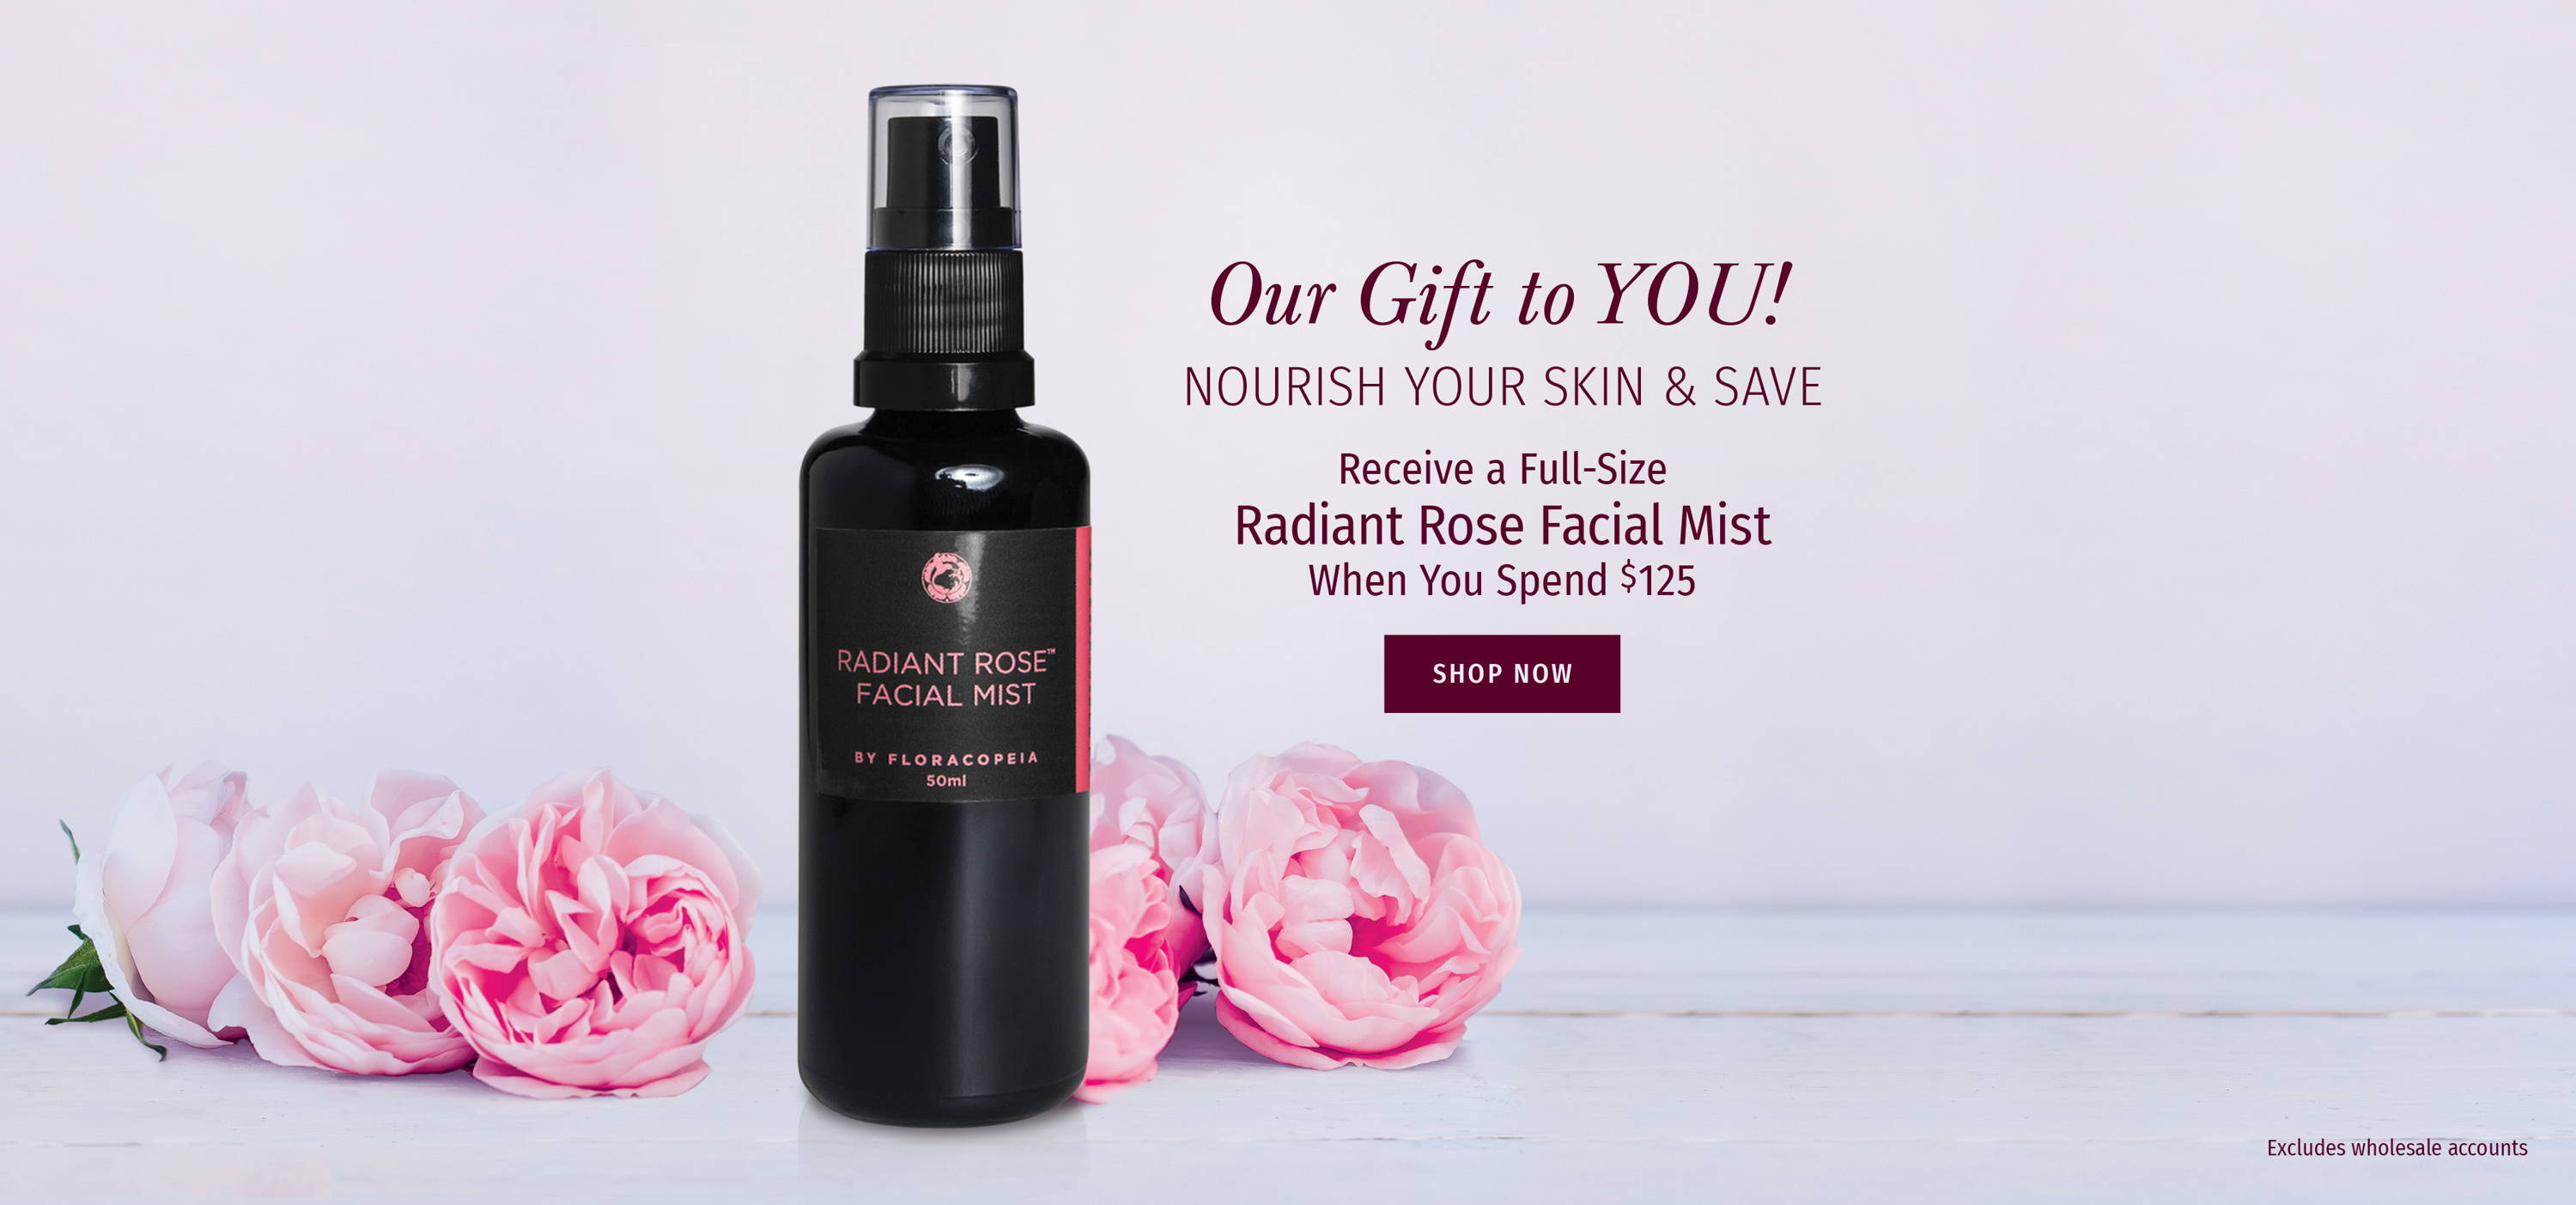 radiant rose facial mist free on orders over $125 shop now